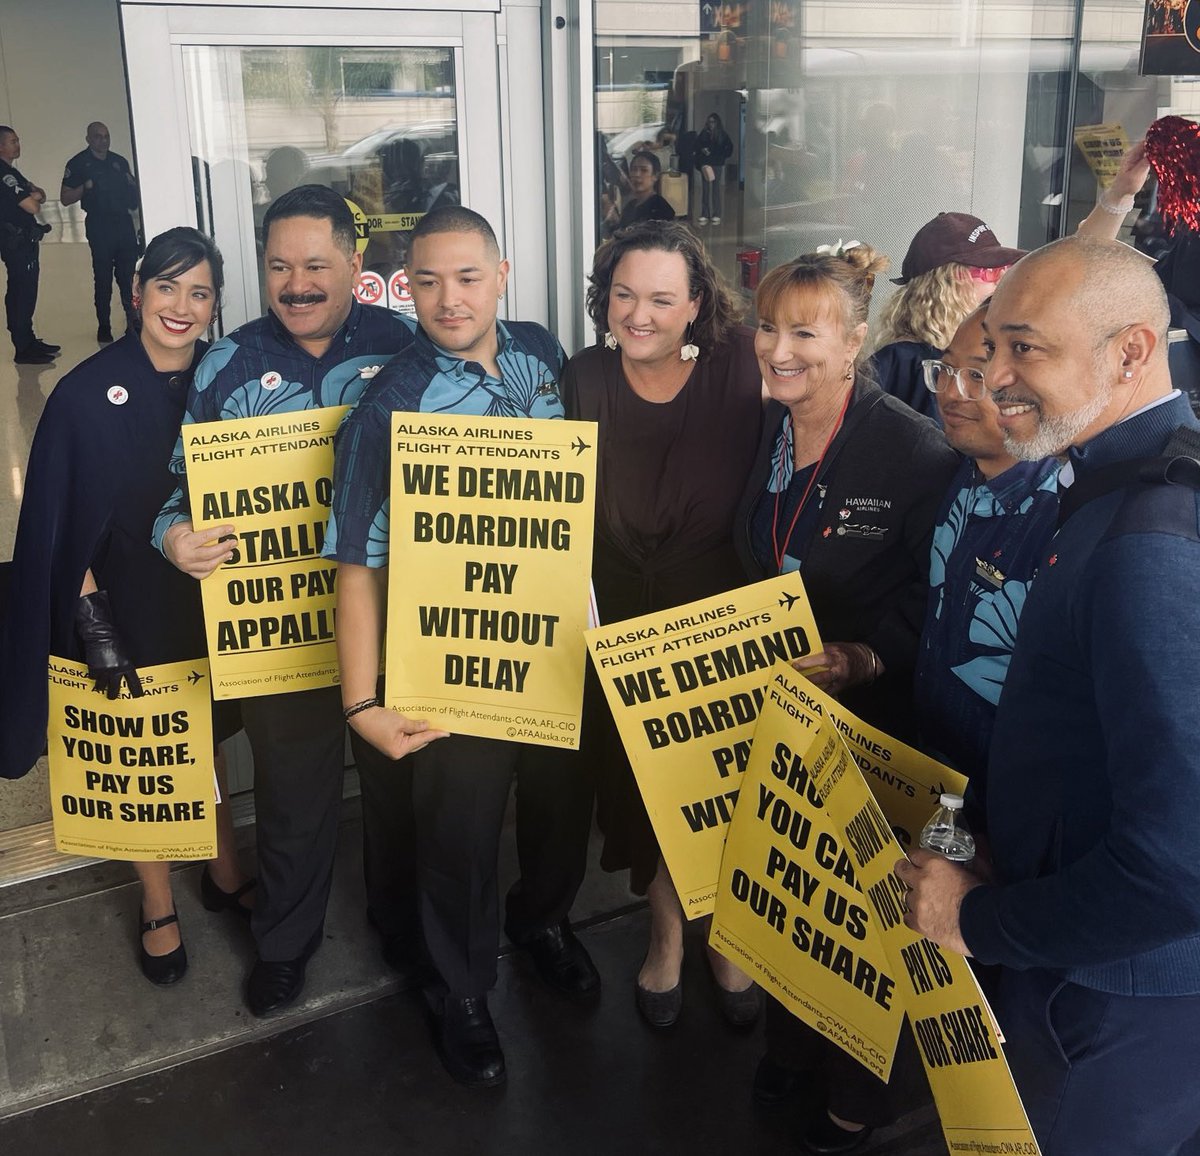 Flight attendants deserve so much more respect than they receive, especially with airlines posting record profits. I was proud to join @afa_cwa members at LAX today as they call on @AlaskaAir to provide employees with the wages and benefits they need to thrive.